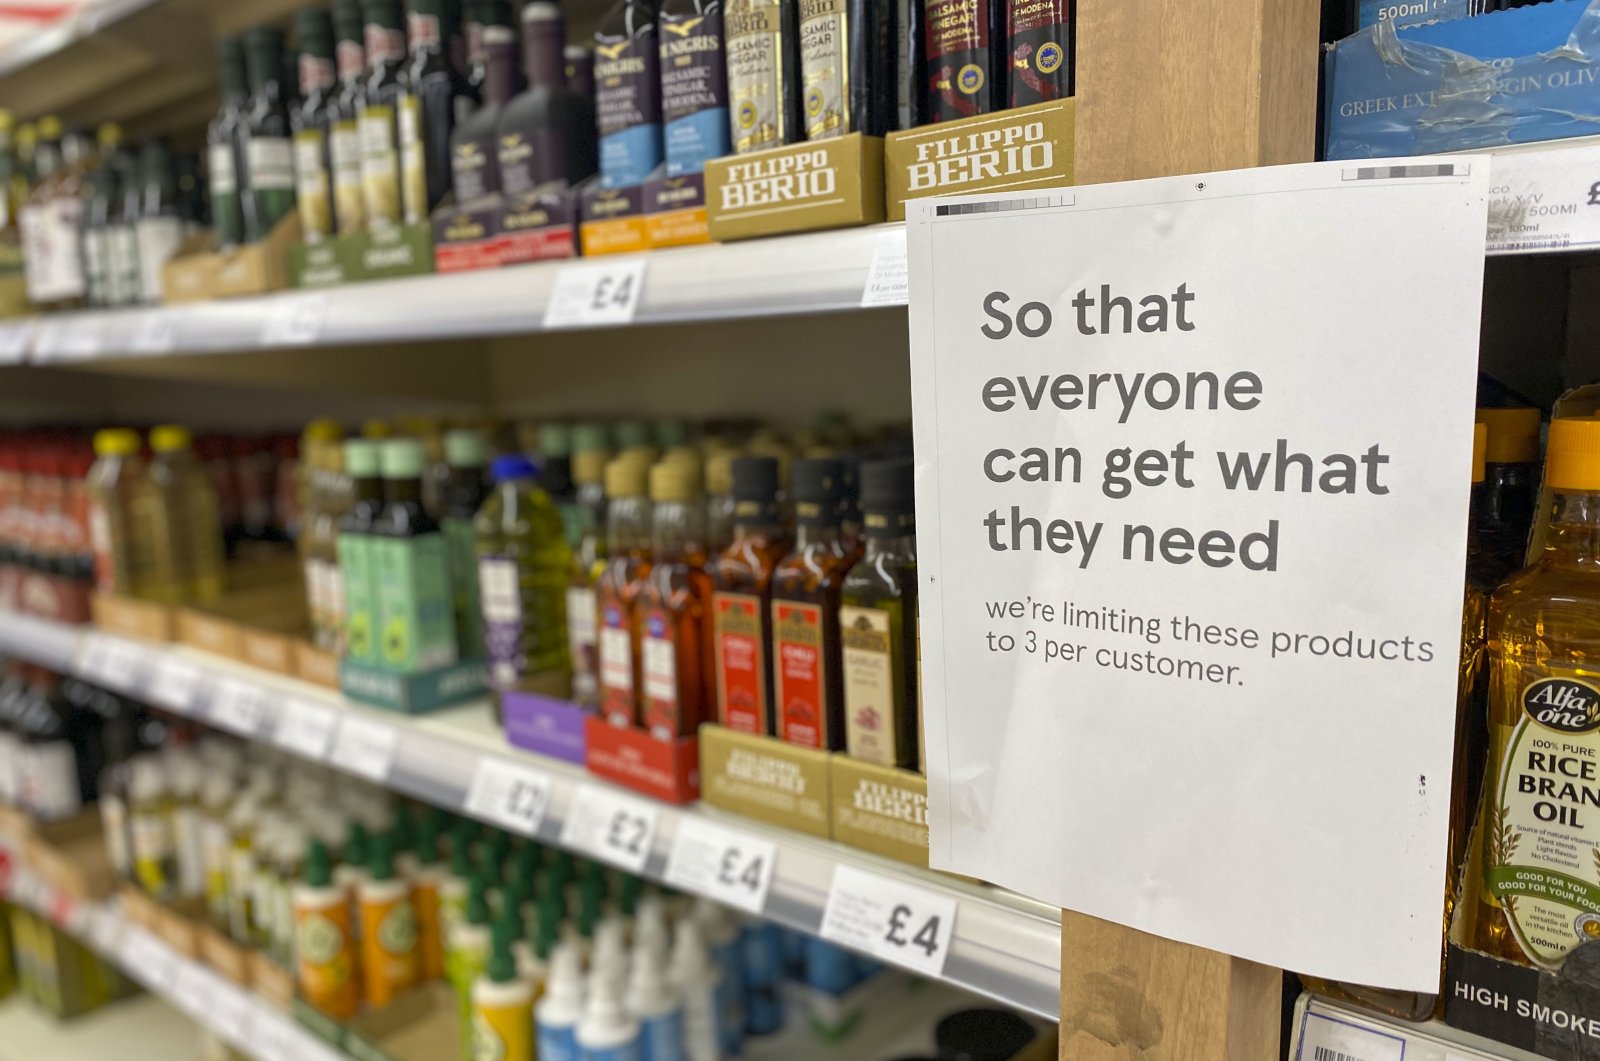 A sign asking shoppers to limit buying the amount of cooking oil is displayed on a shelf in a supermarket in Ashford, UK, April 23, 2022. (AP Photo)